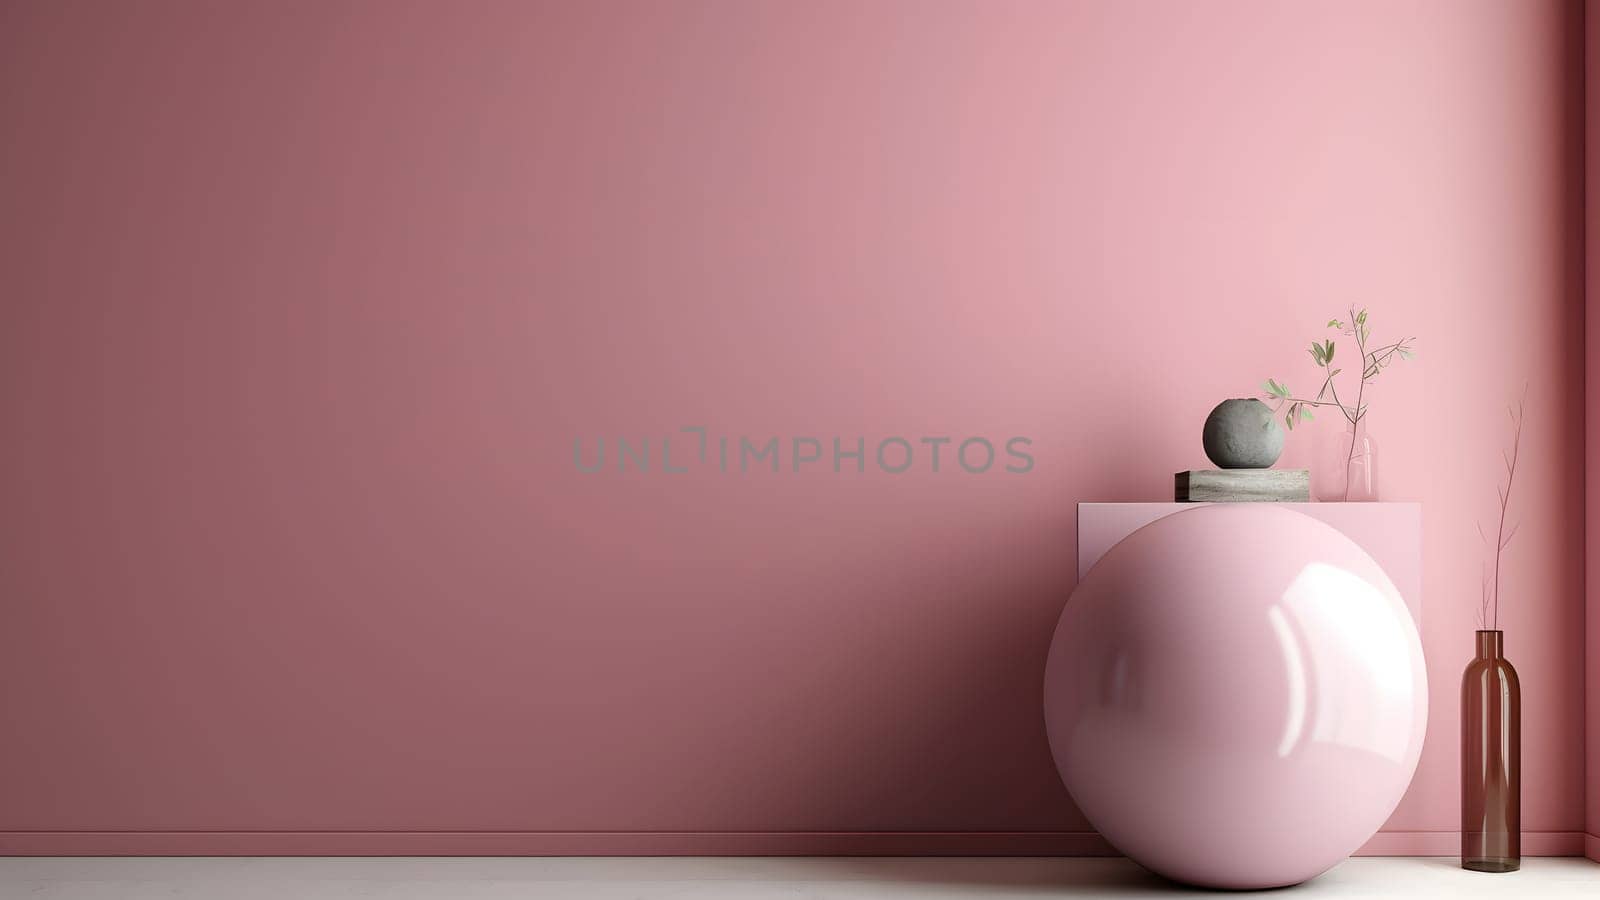 minimalistic composition scene with pastel pink semigloss ball on white floor and pastel pink wall near a vase with green plant, neural network generated art by z1b